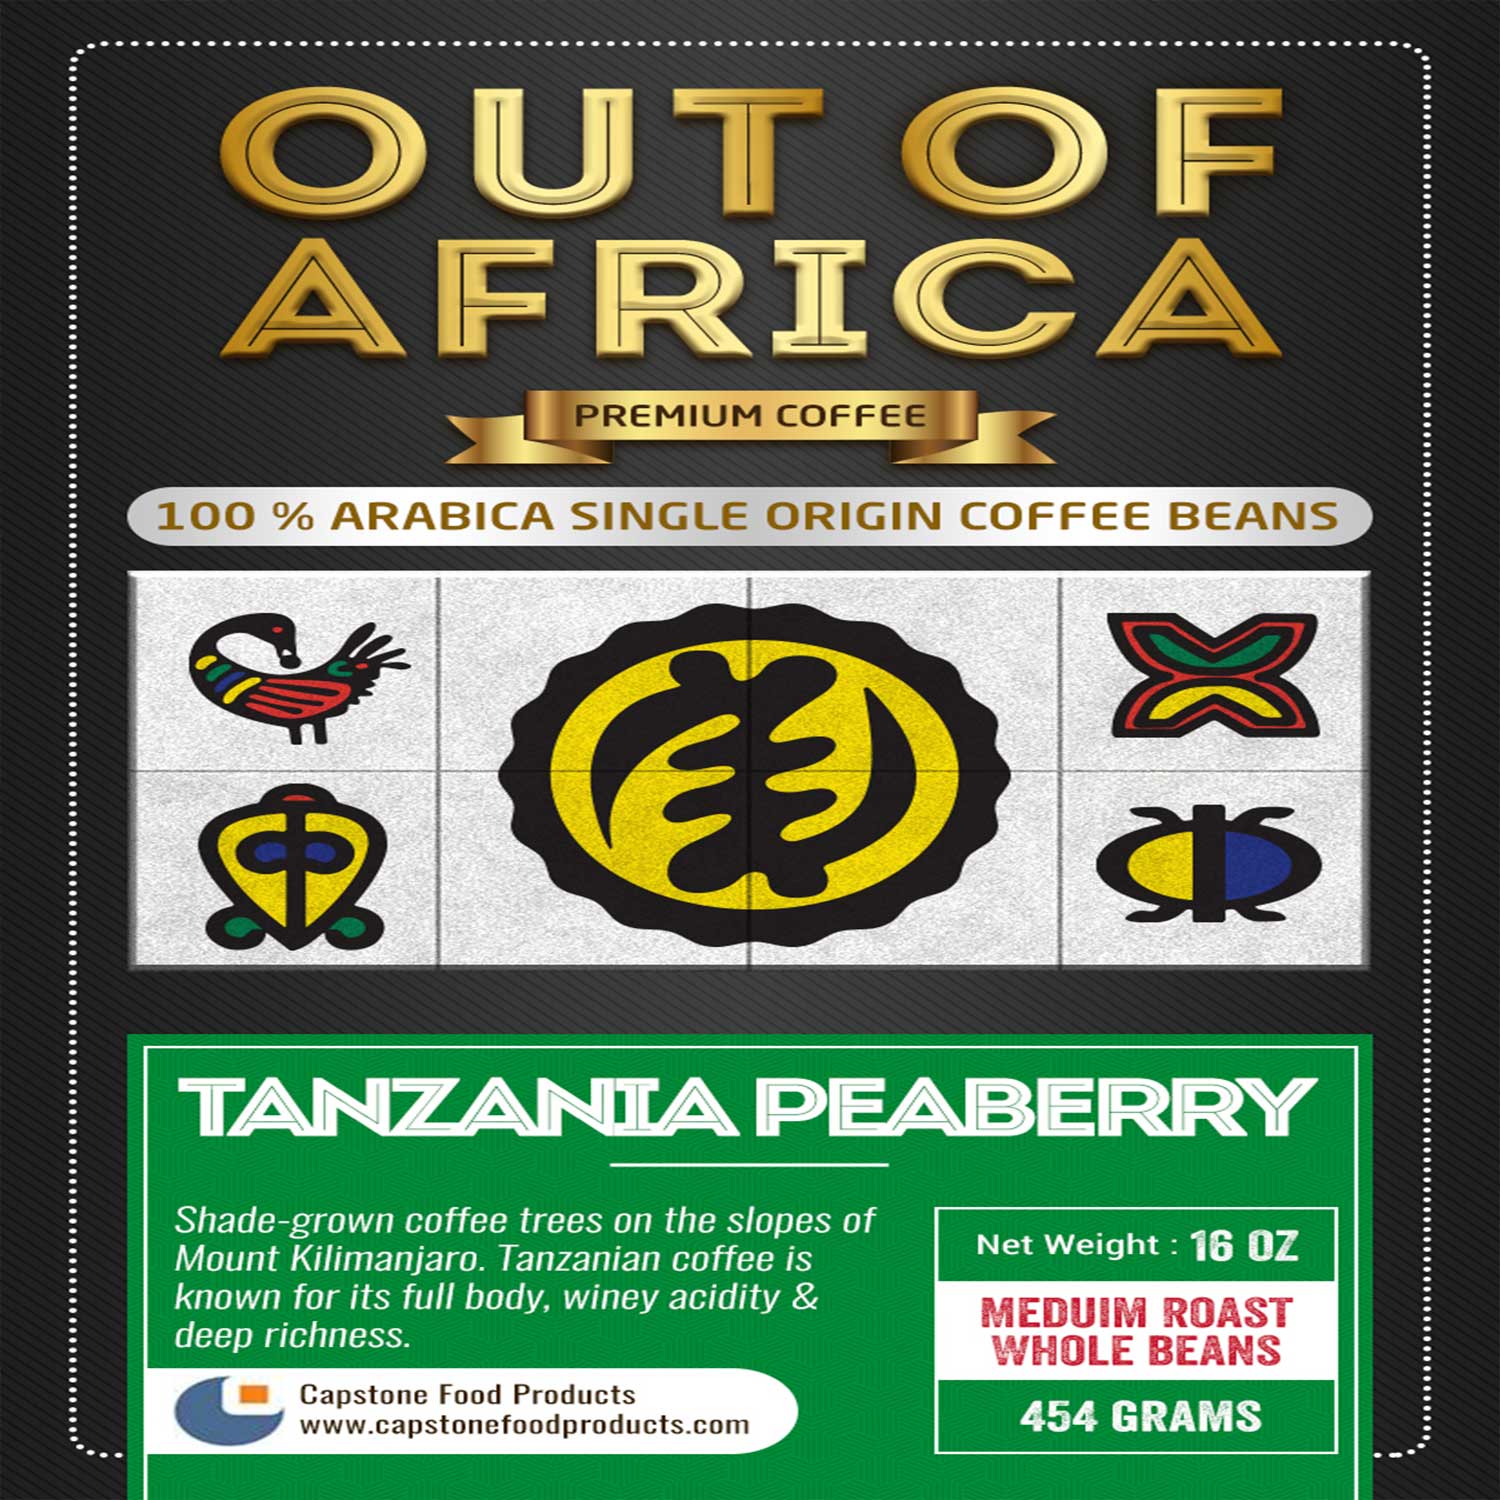 Tanzania-Out-of-Africa-Peaberry-front-Premuim-Coffee-new